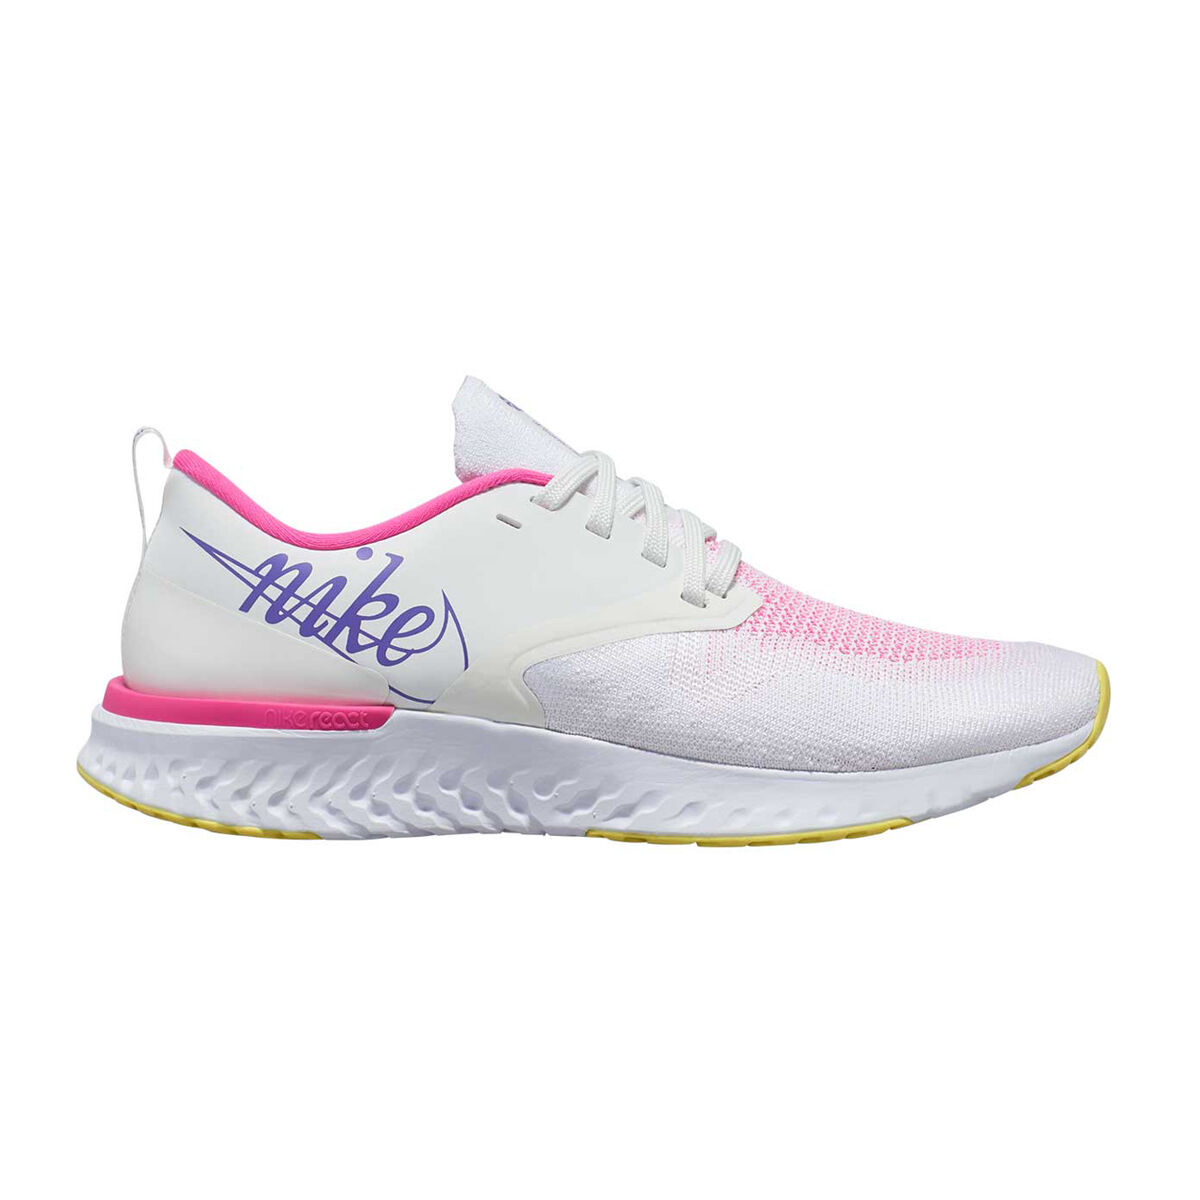 odyssey react 2 trainers ladies